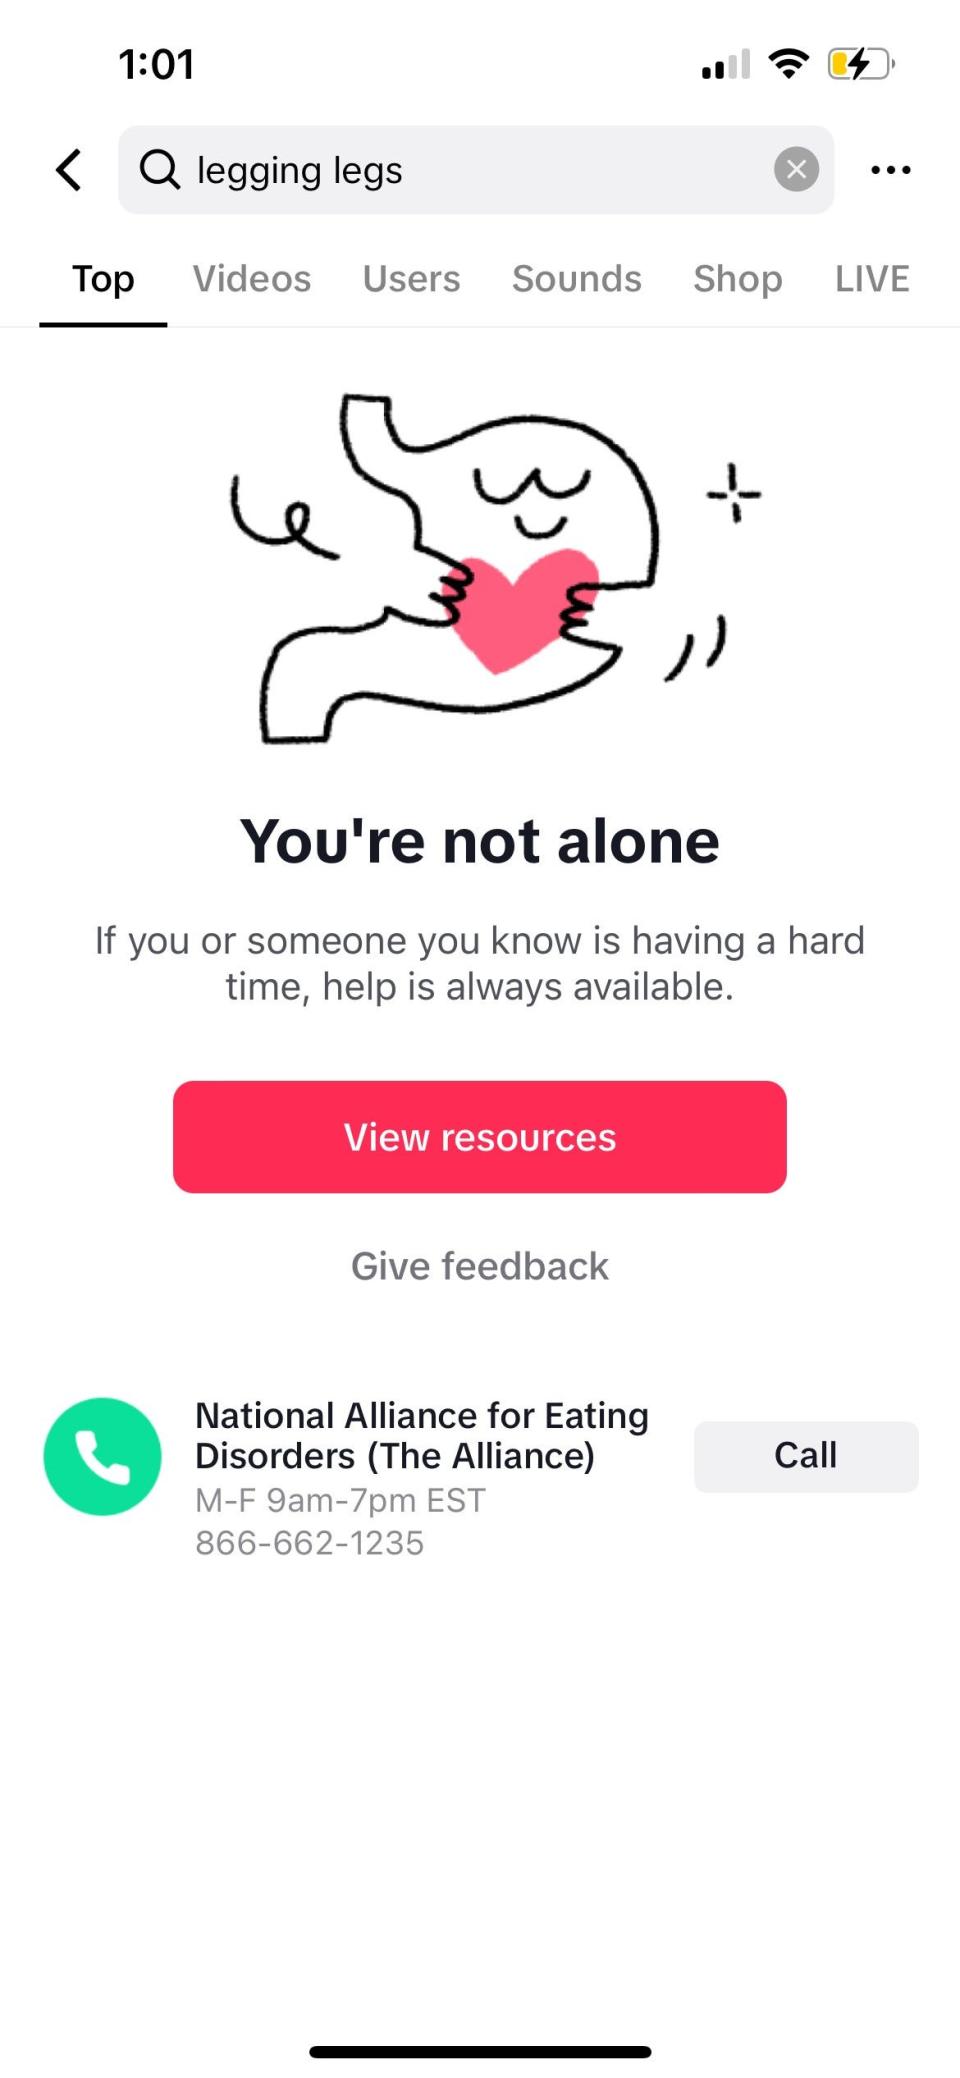 A search for "legging legs" on TikTok provides users with resources for eating disorders. Users are provided with an explanation of what eating disorders are and tips on how to approach body image and concerns.